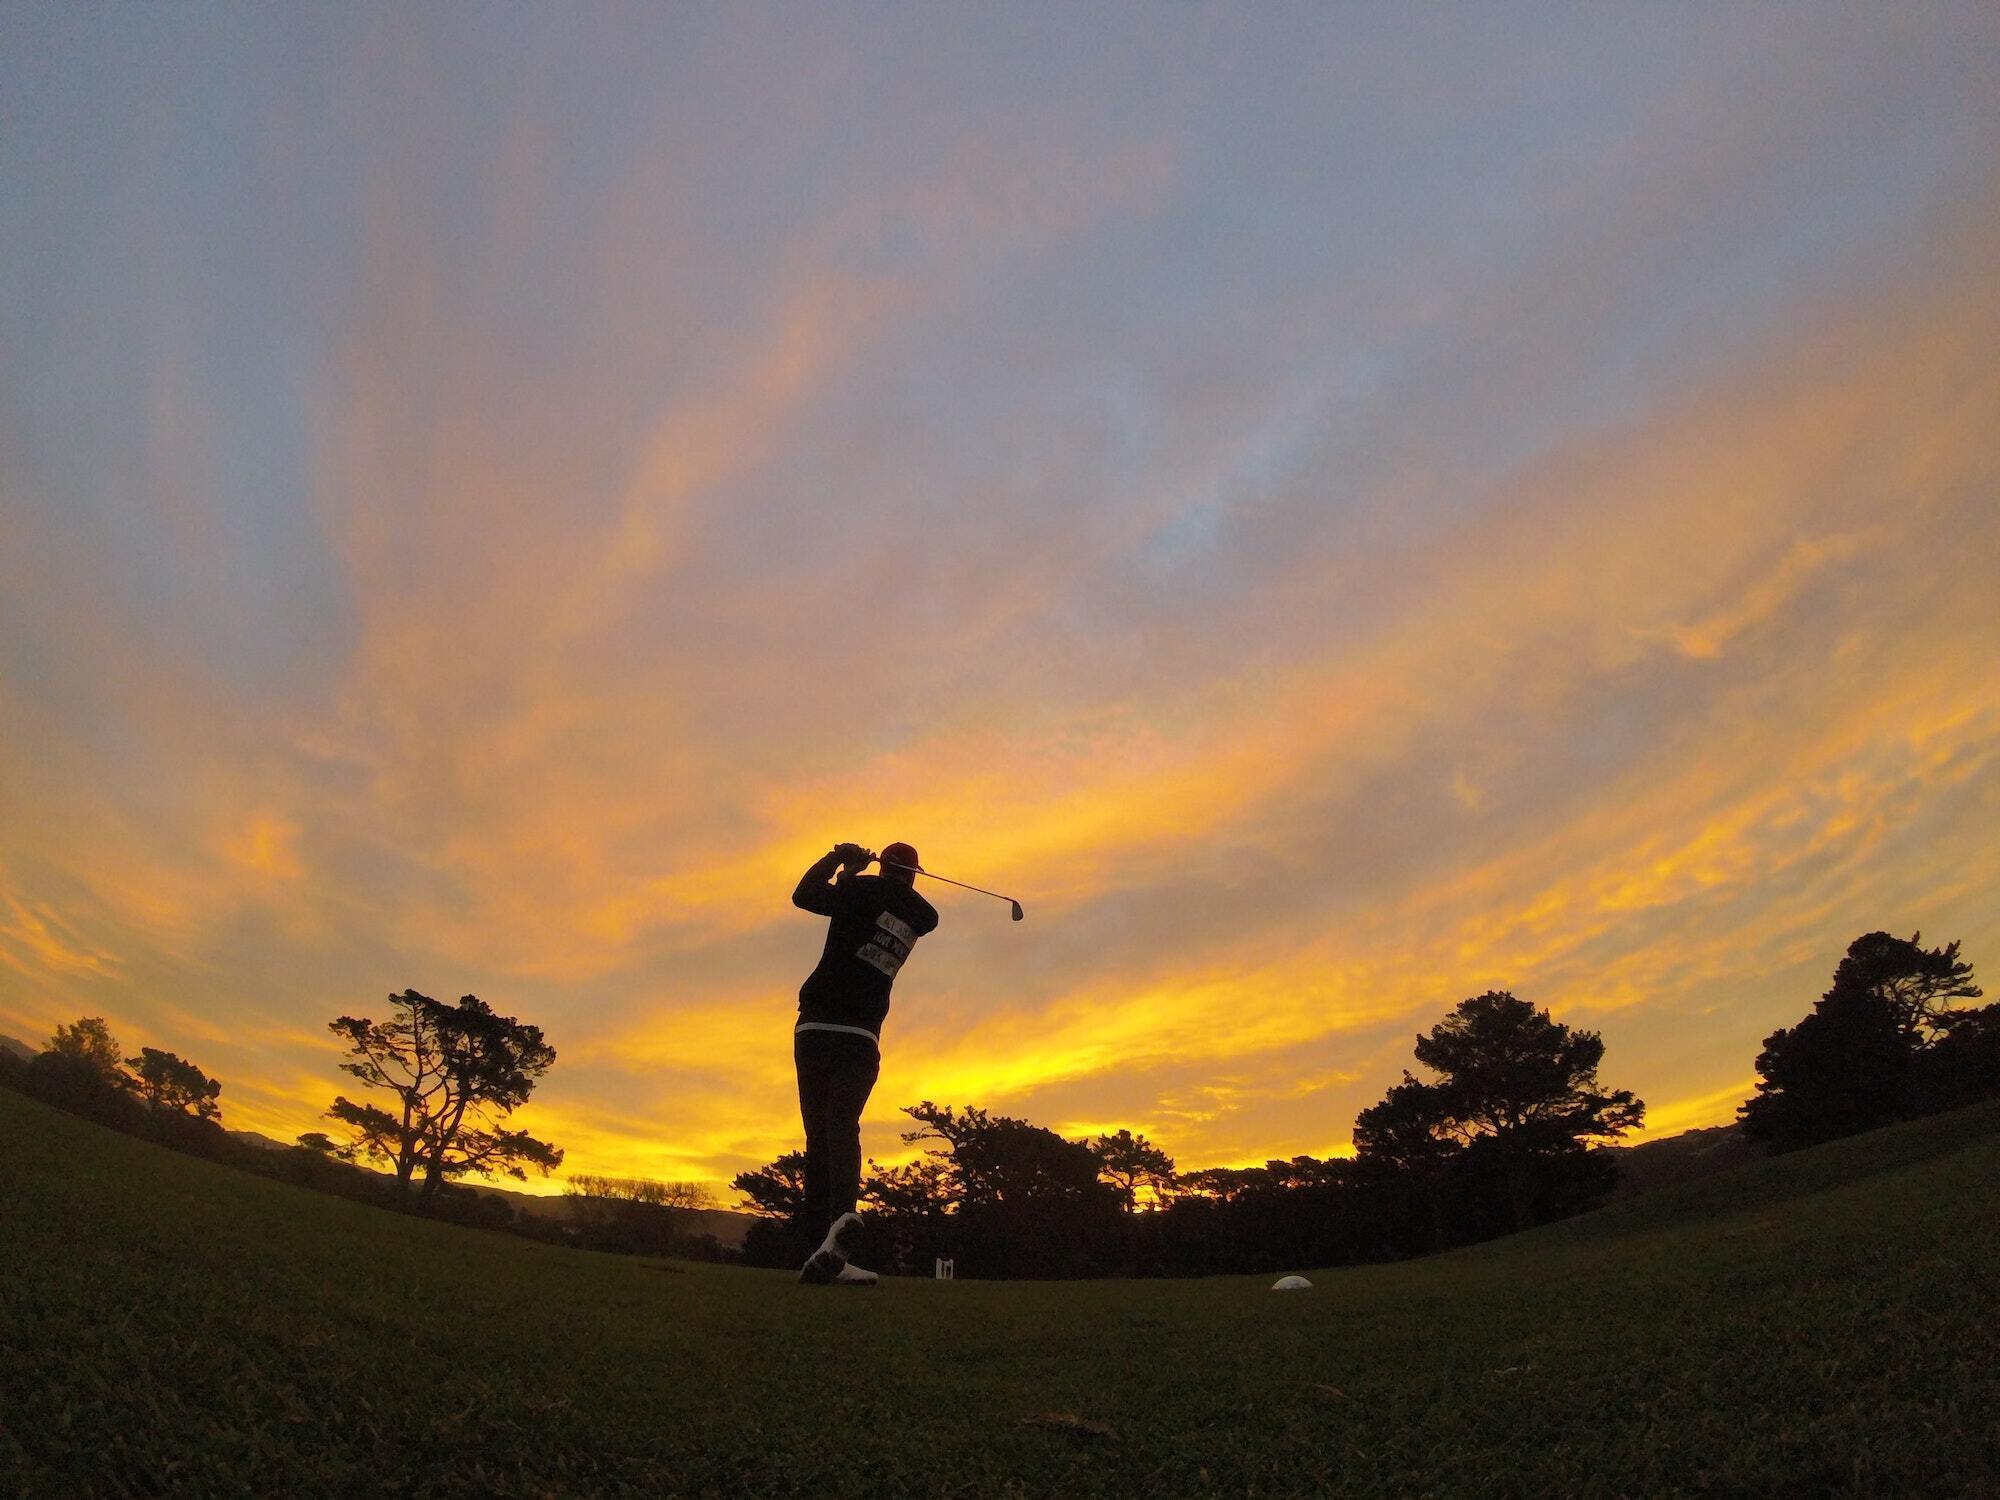 Man taking a swing on a golf course at sunset